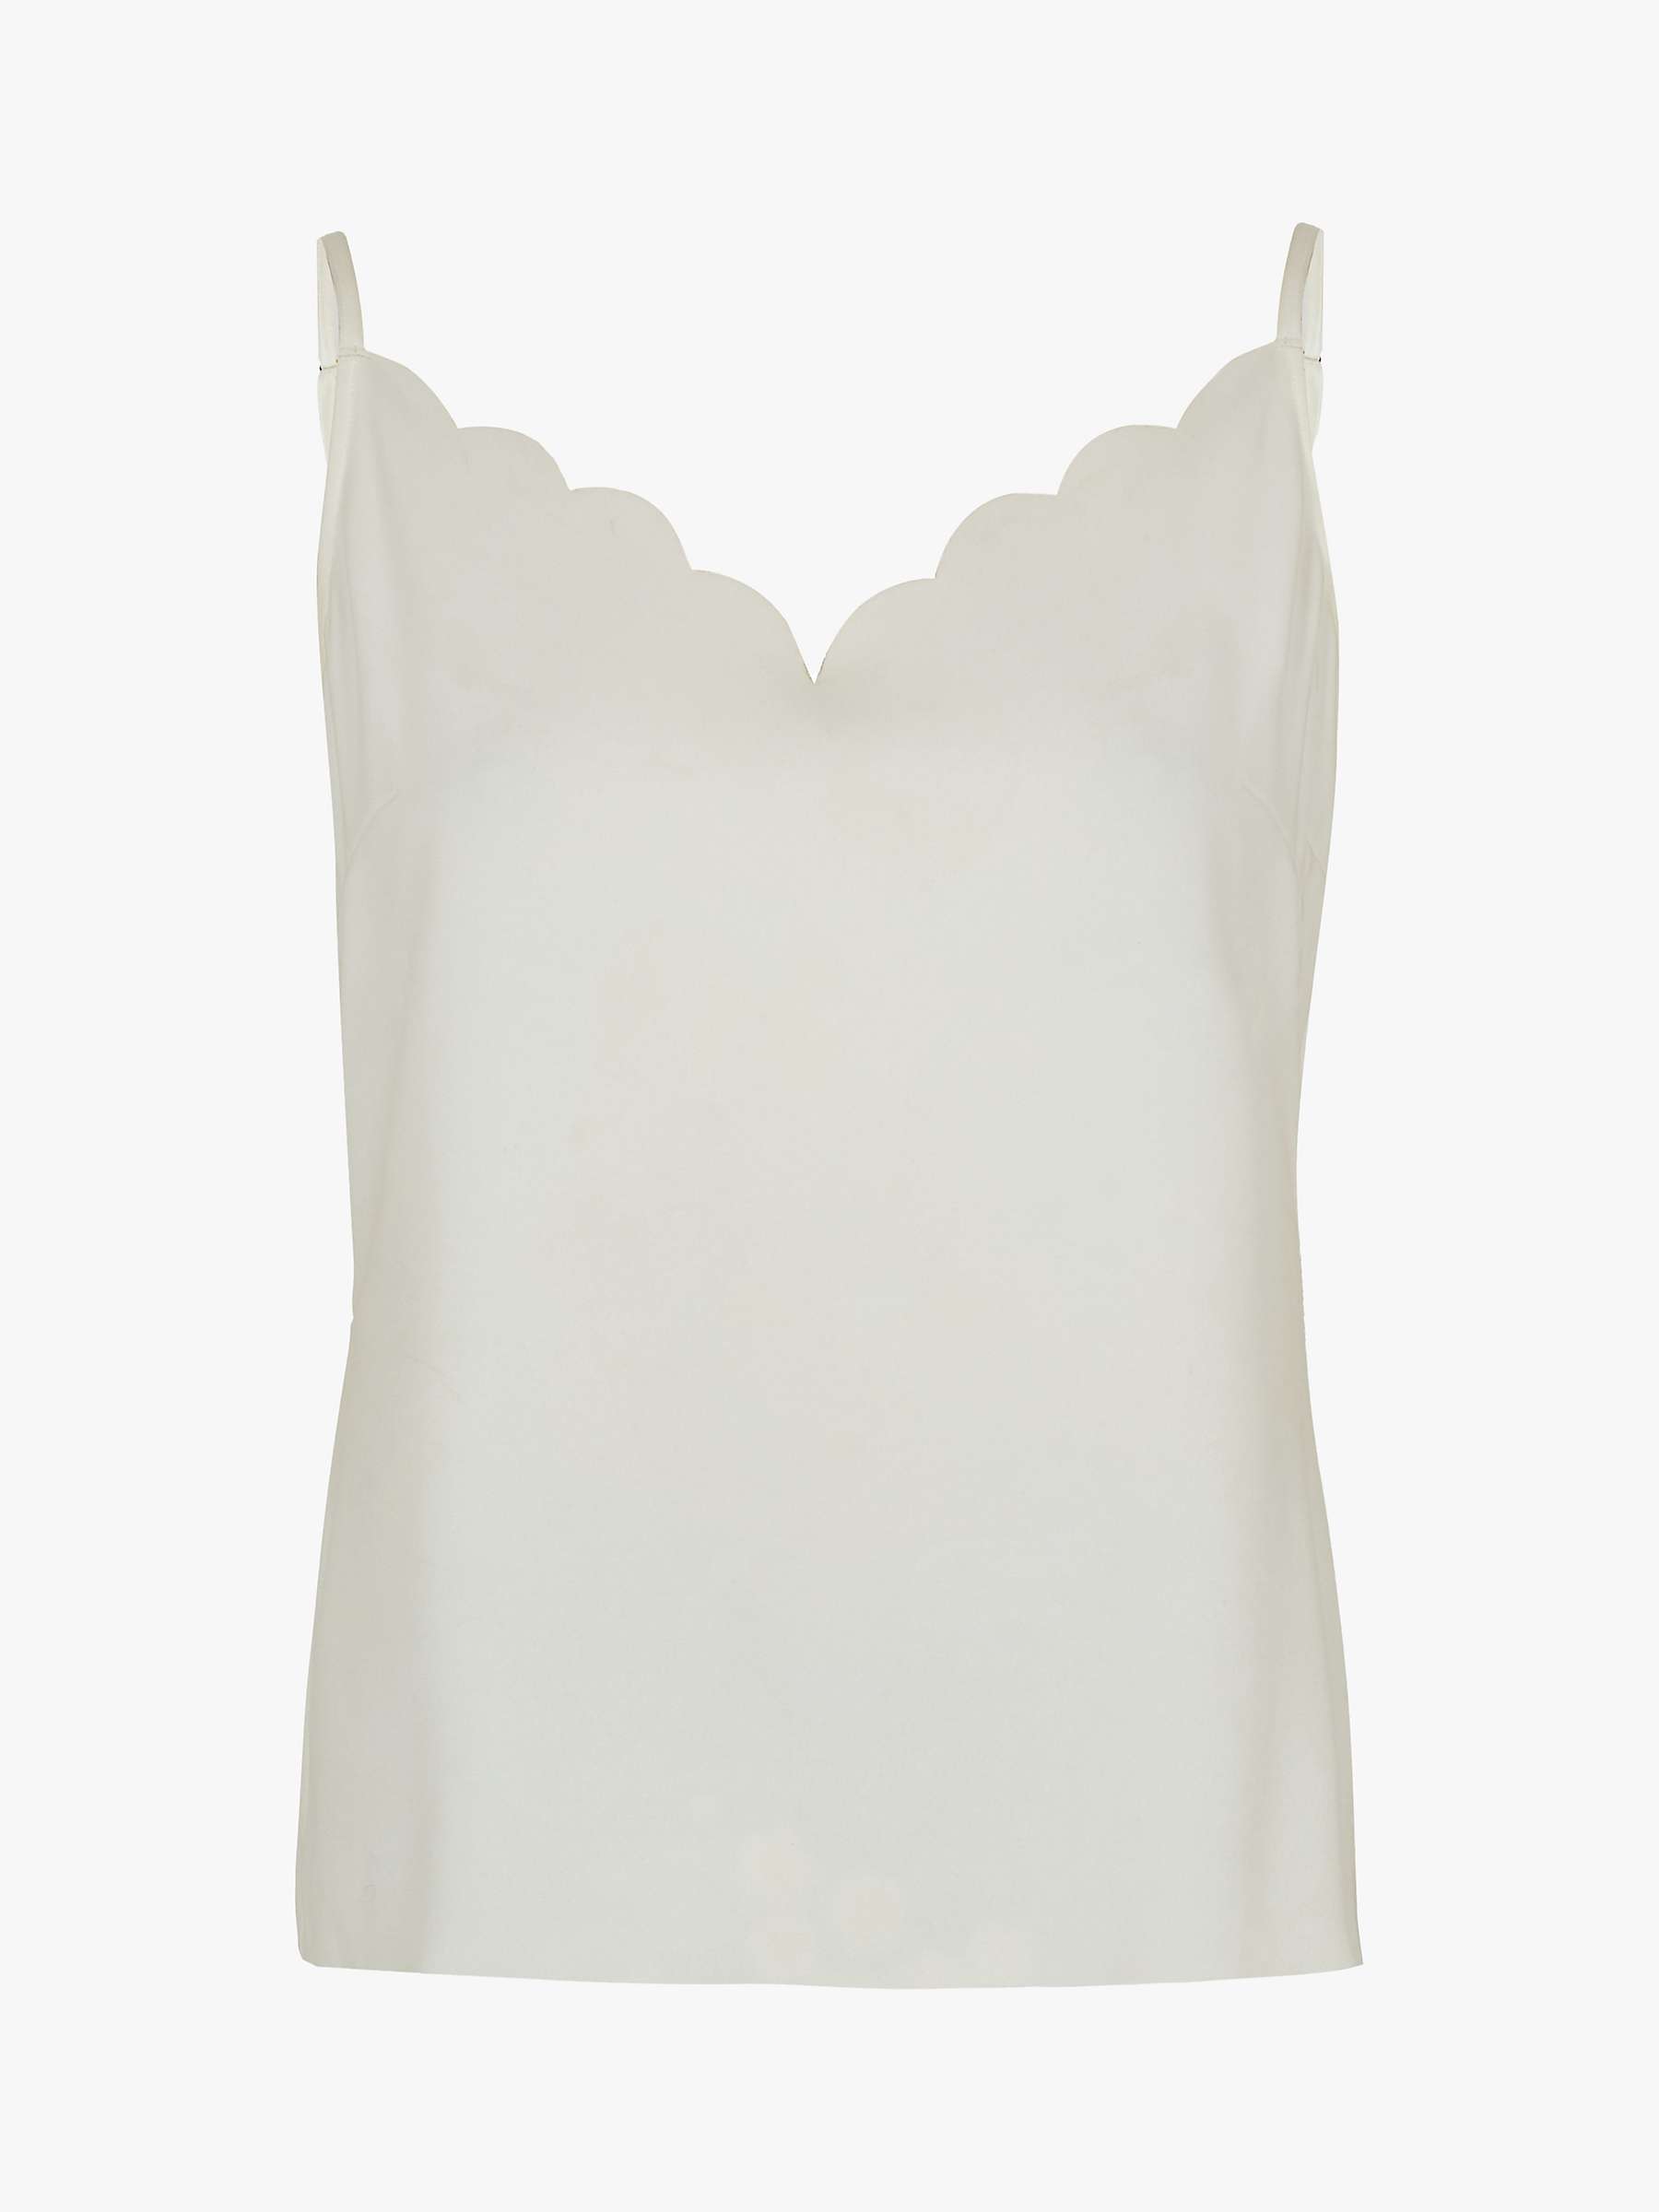 Buy Ted Baker Siina Scallop Detail Top Online at johnlewis.com